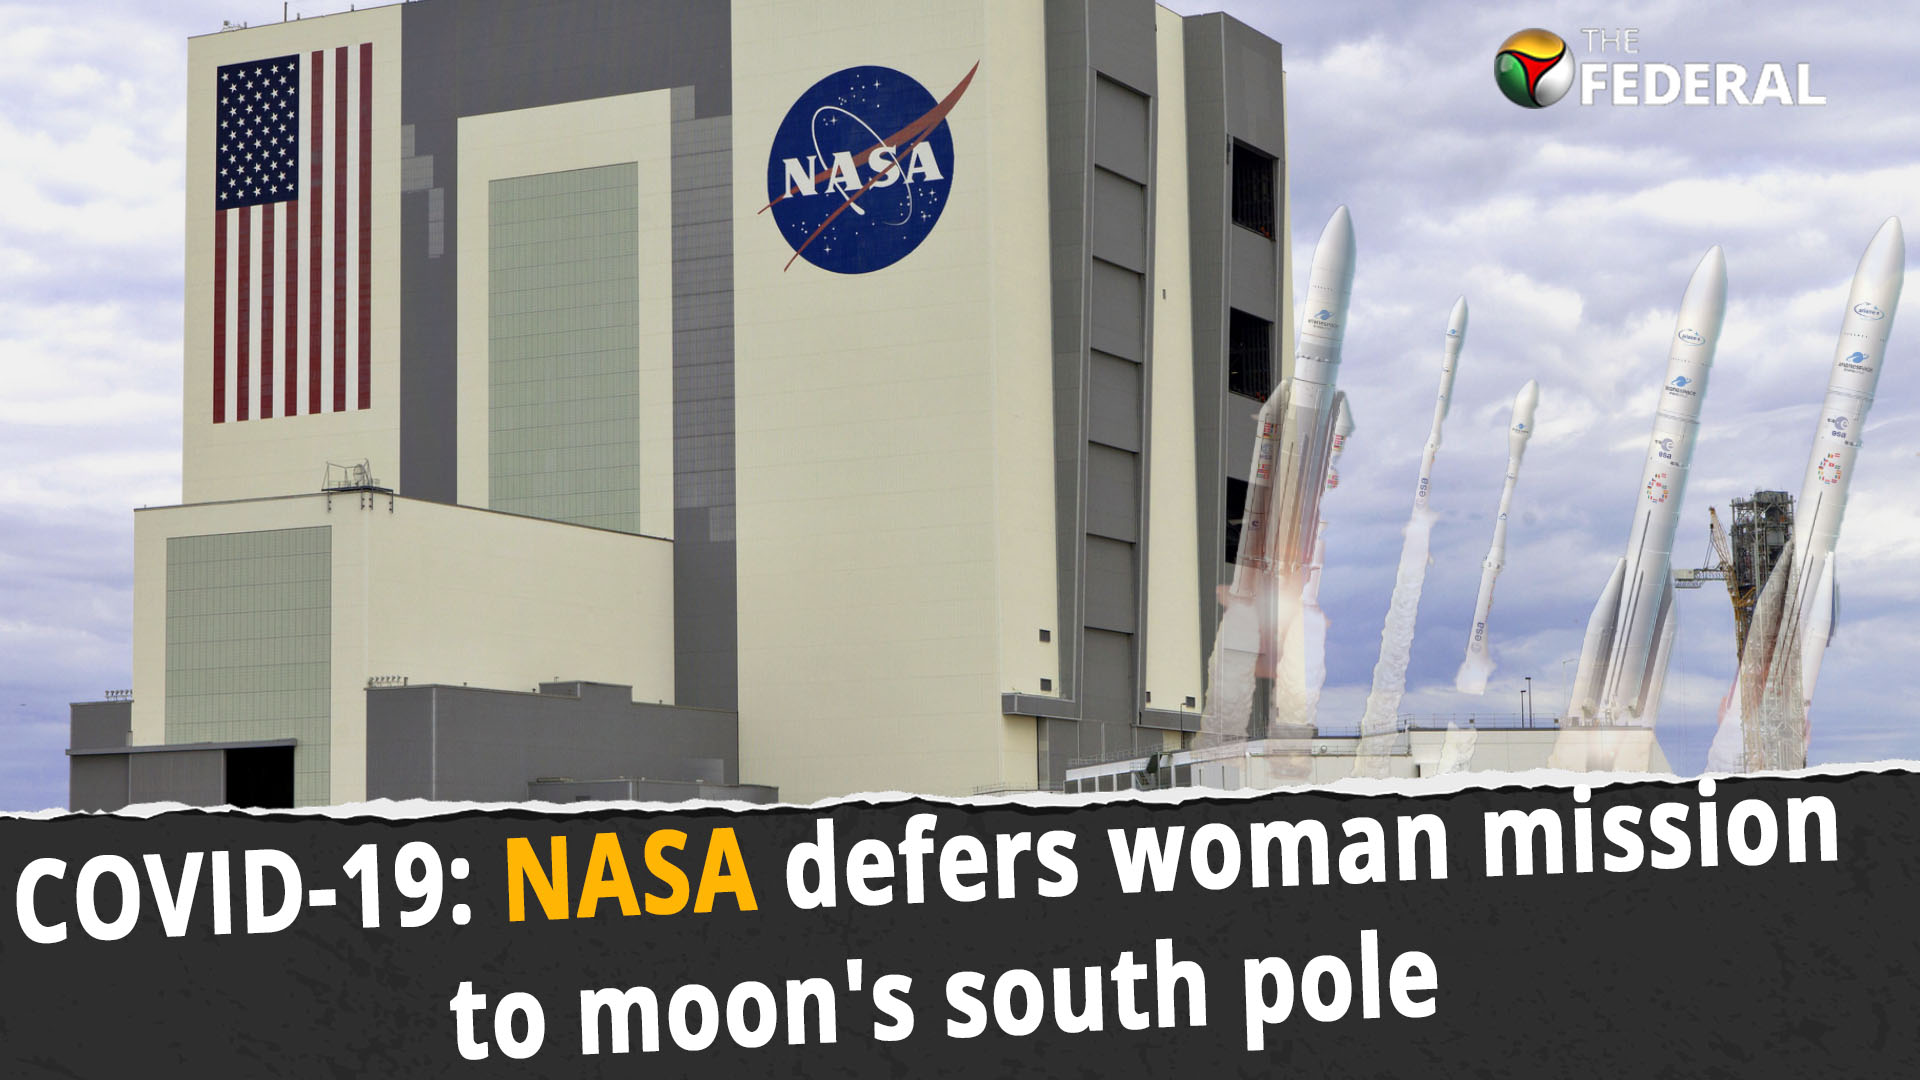 COVID-19: NASA defers woman mission to moons south pole